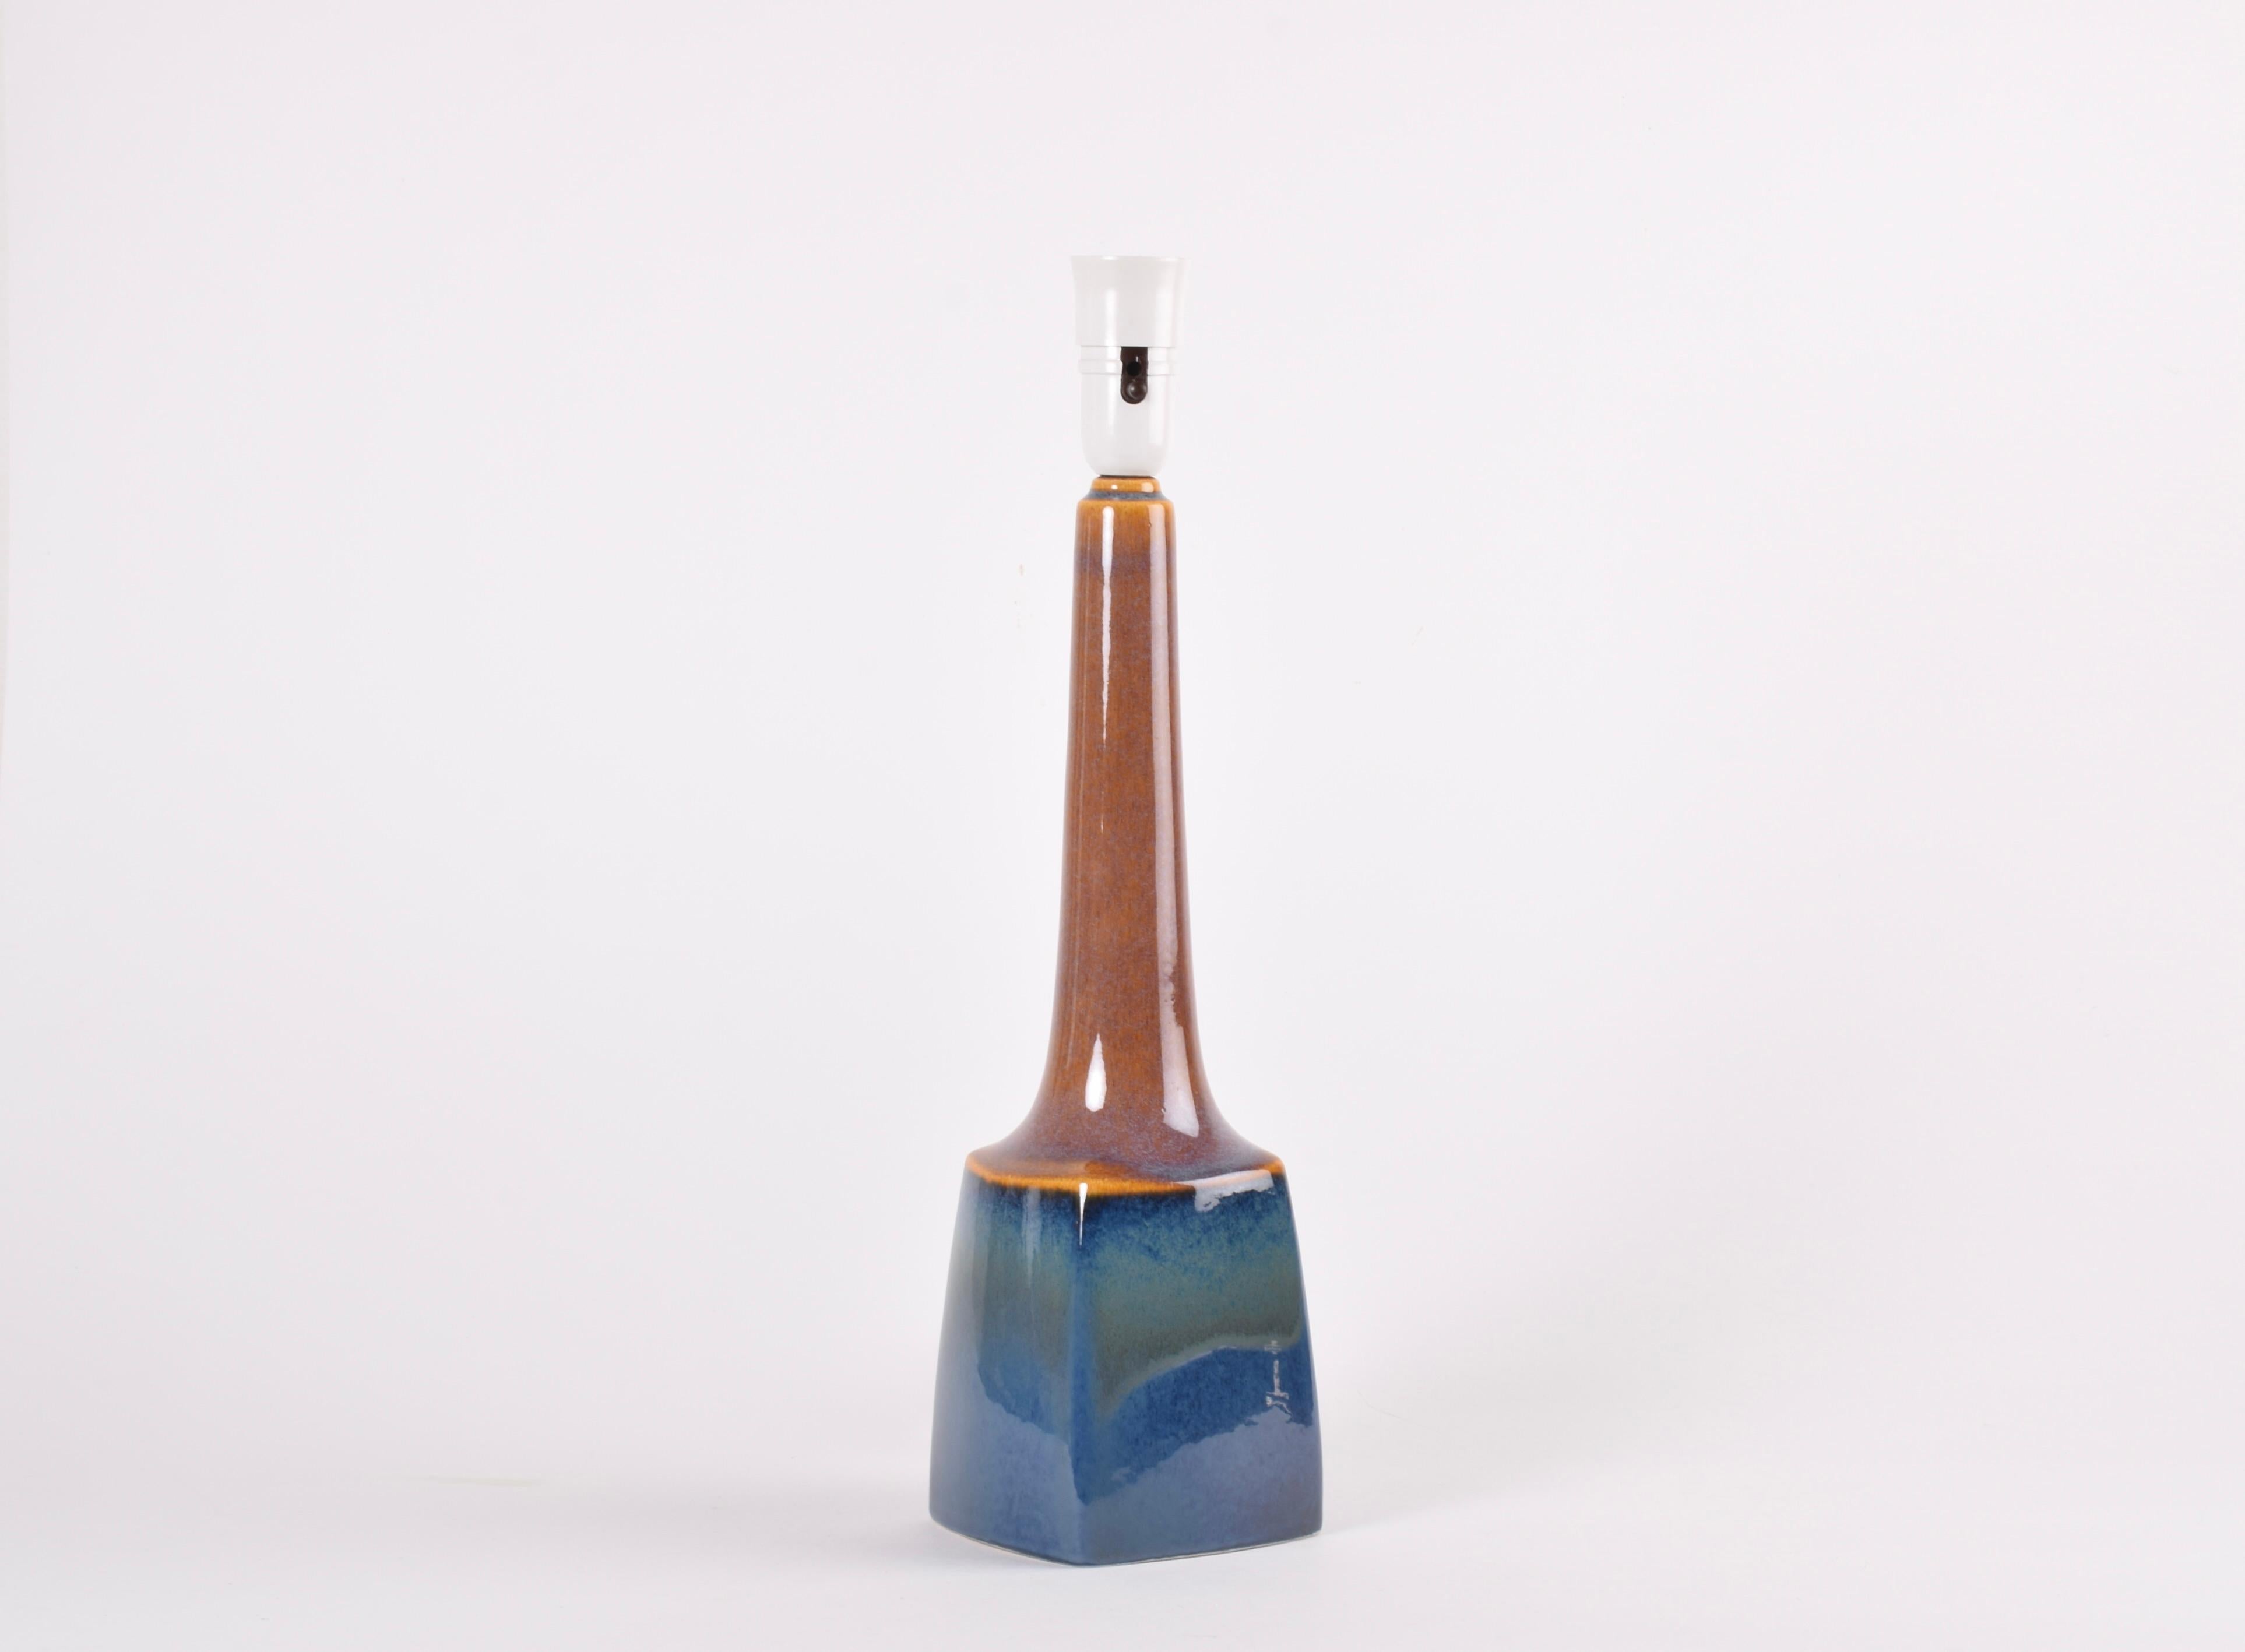 Mid-20th Century Tall Søholm Table Lamp with Blue Brown Glaze, Danish Modern Ligthing 1960s For Sale